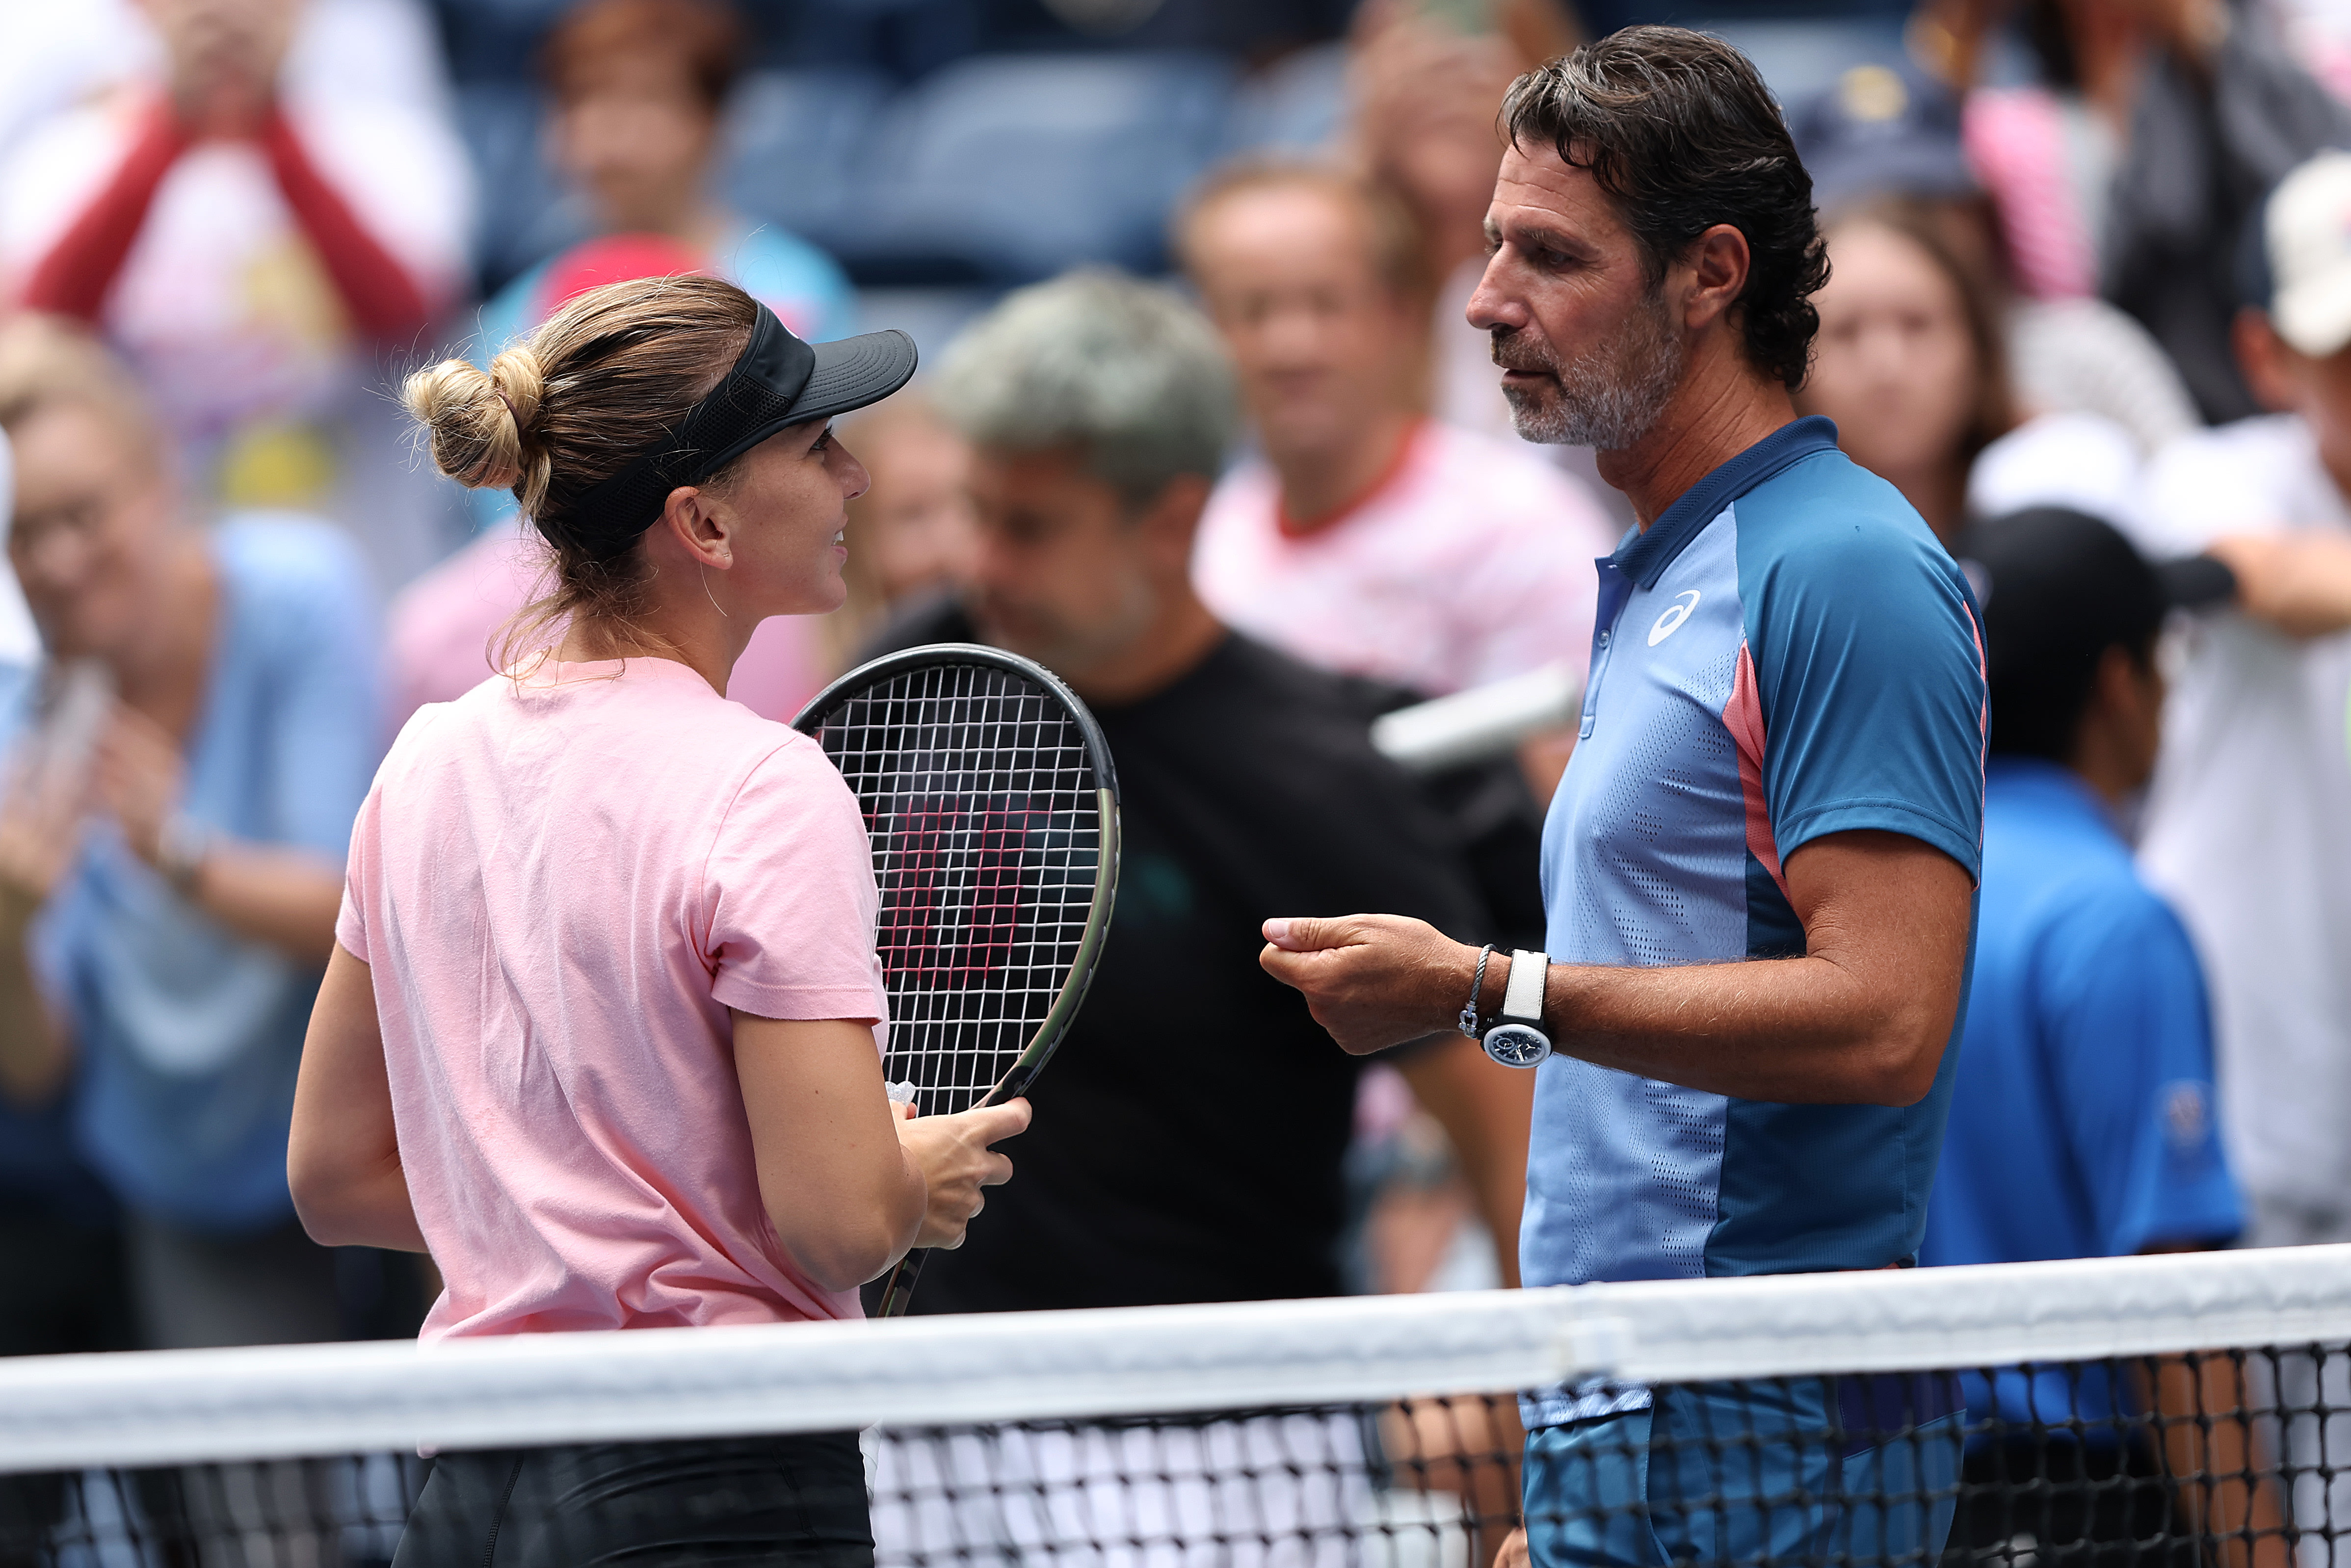 Patrick Mouratoglou releases official statement on Simona Haleps provisional suspension